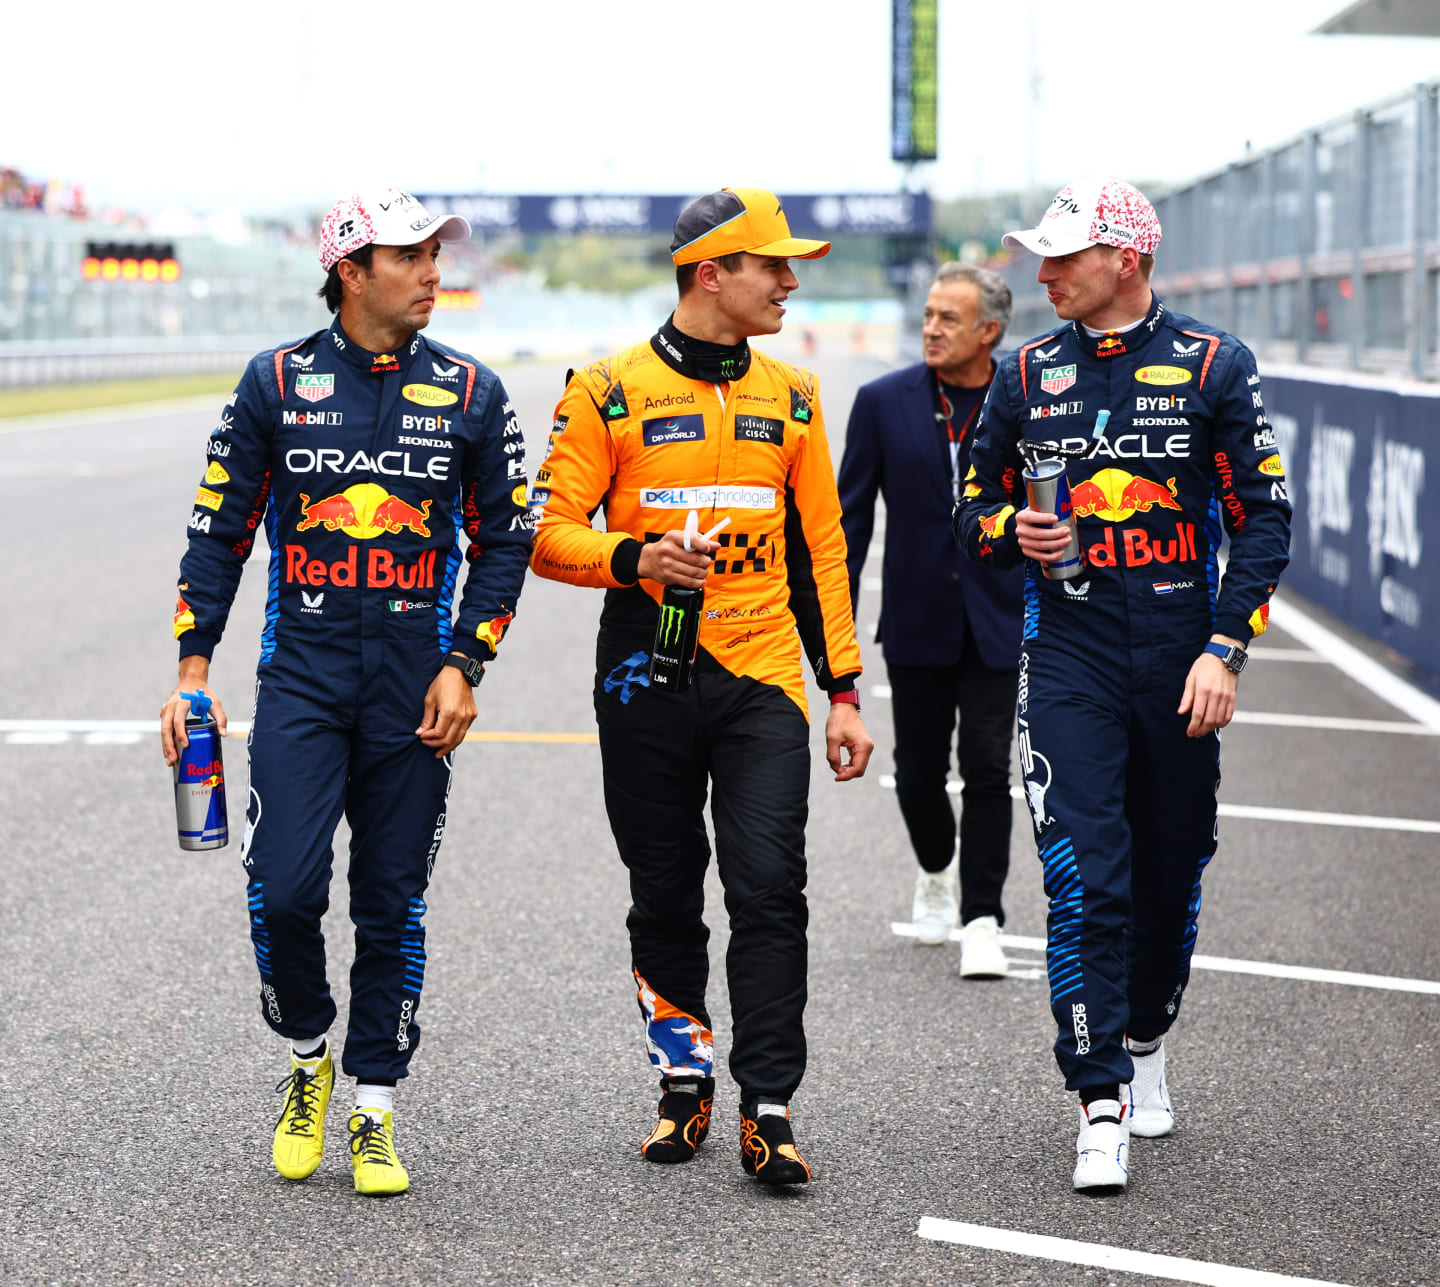 SUZUKA, JAPAN - APRIL 06: Pole position qualifier Max Verstappen of the Netherlands and Oracle Red Bull Racing (R), Second placed qualifier Sergio Perez of Mexico and Oracle Red Bull Racing (L) and Third placed qualifier Lando Norris of Great Britain and McLaren (C) walk in parc ferme during qualifying ahead of the F1 Grand Prix of Japan at Suzuka International Racing Course on April 06, 2024 in Suzuka, Japan. (Photo by Mark Thompson/Getty Images)